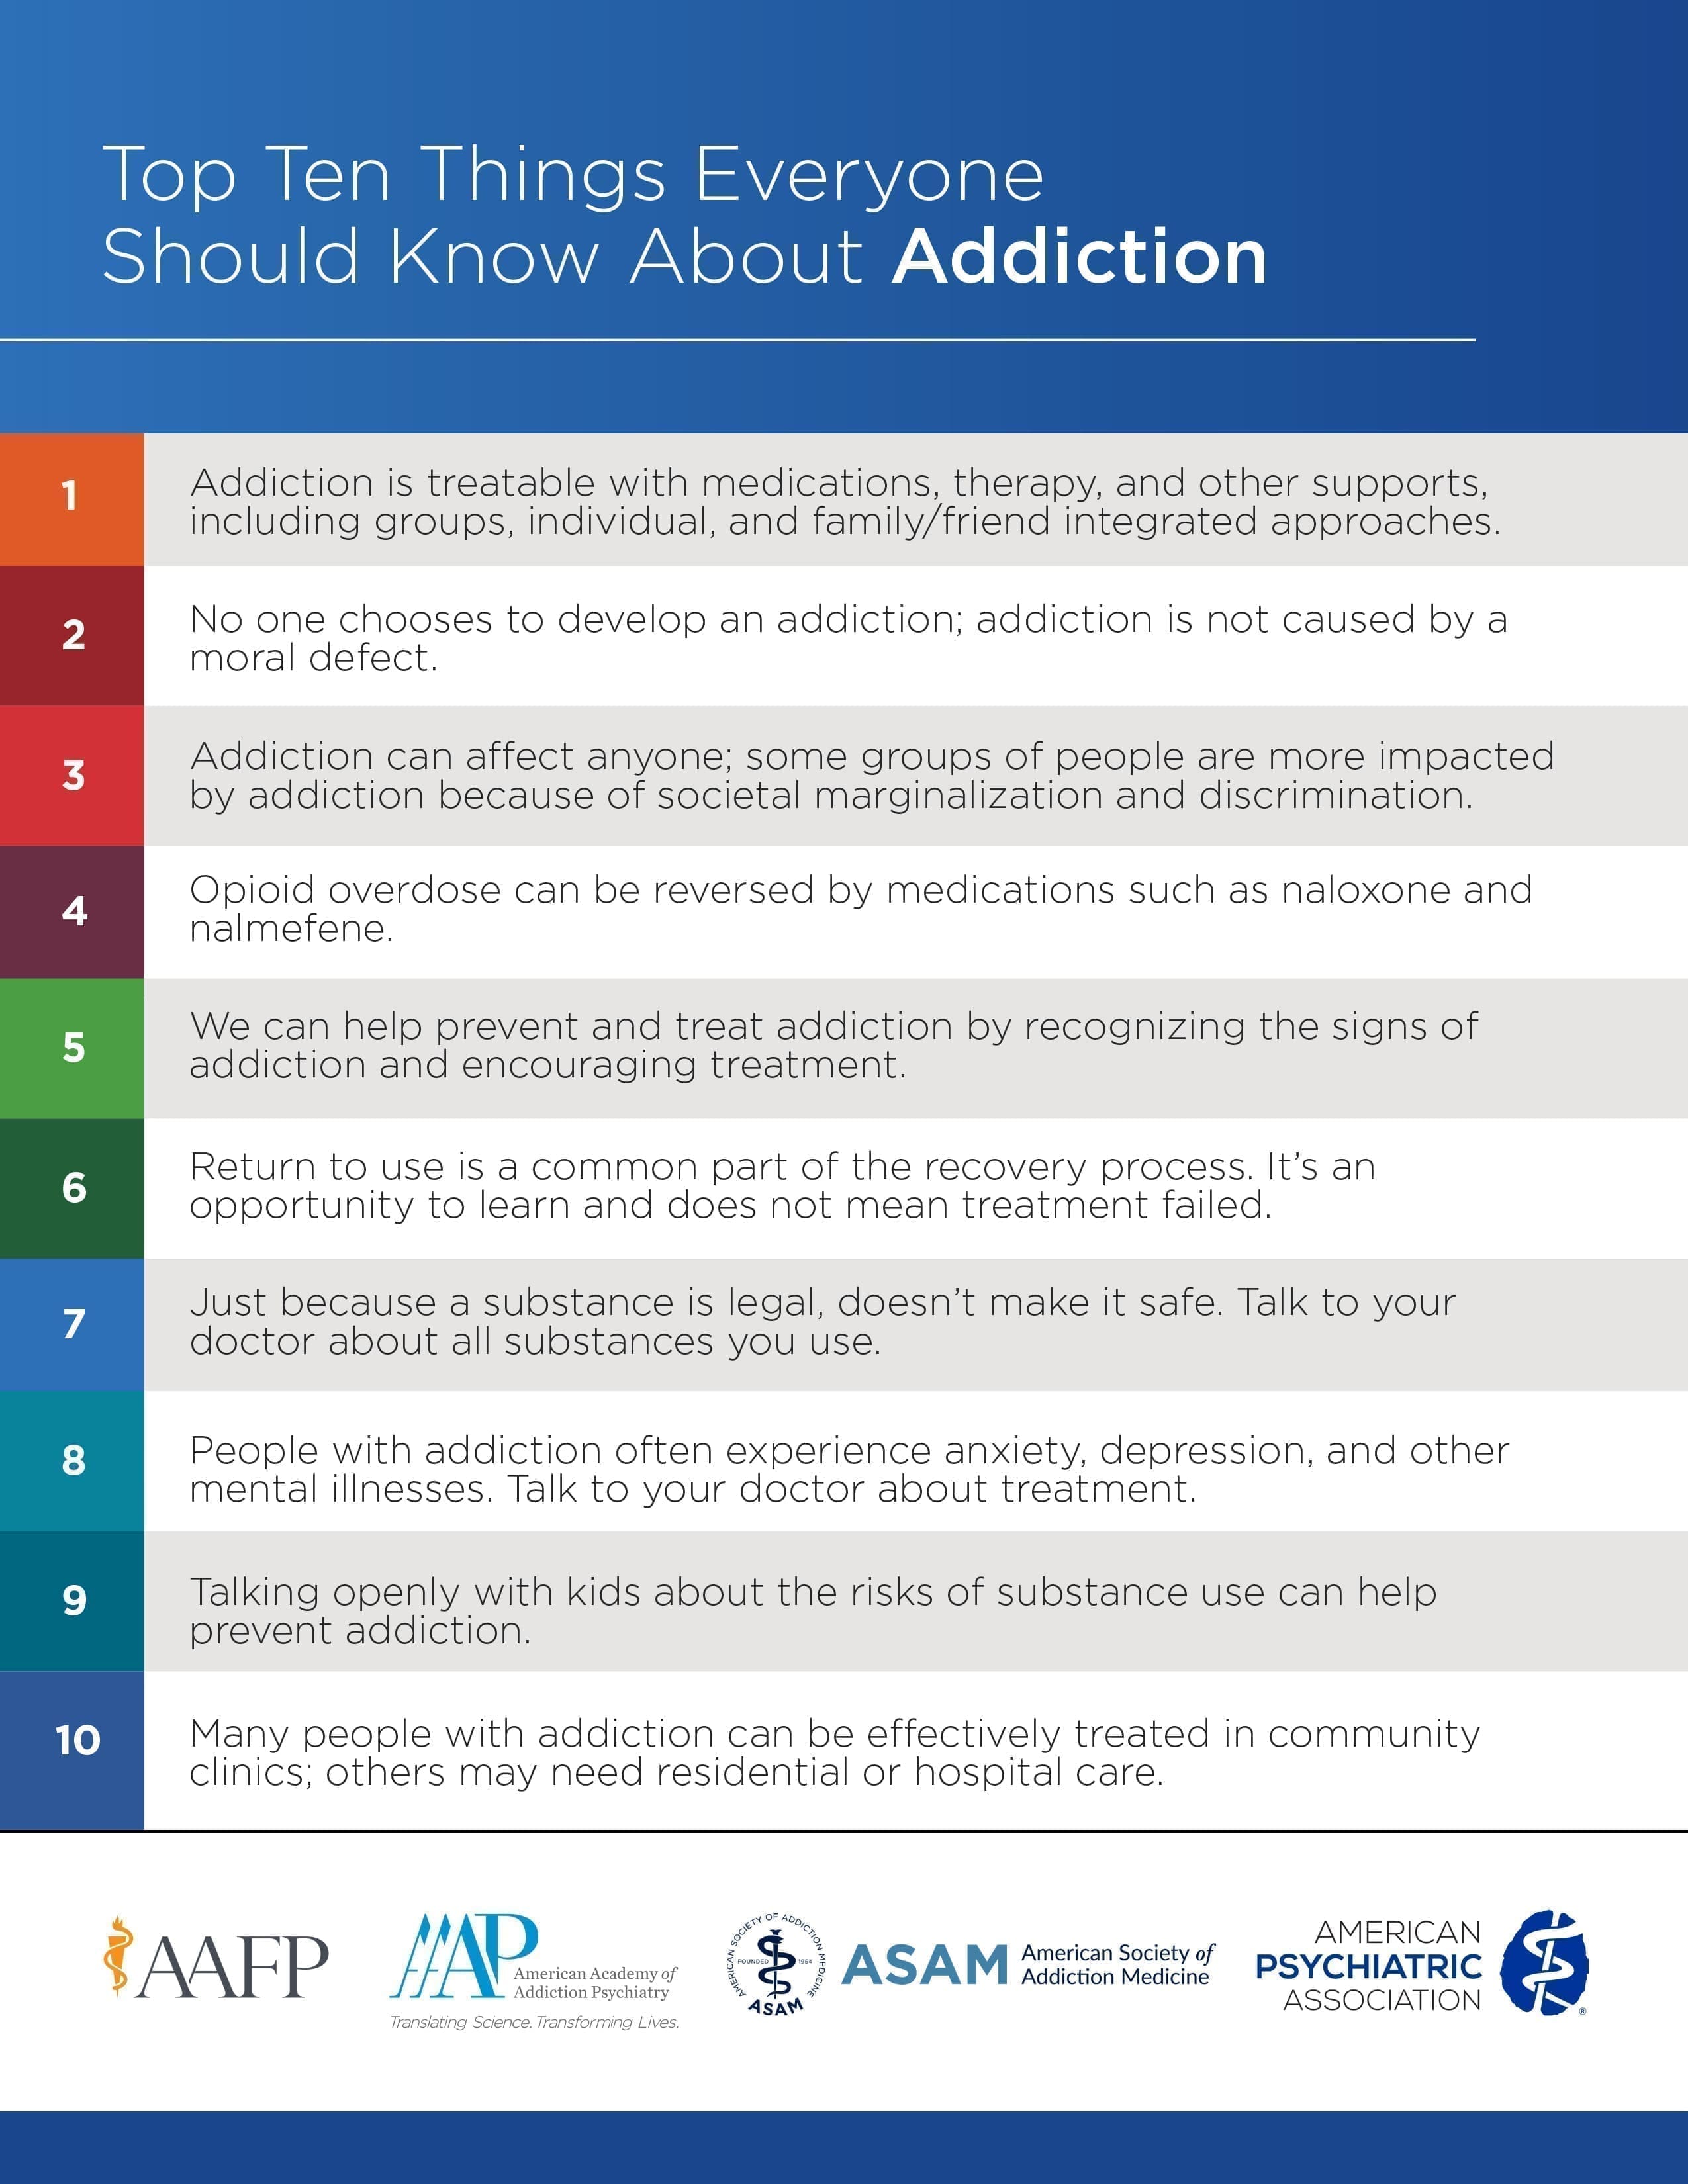 List of top ten things to know about addiction